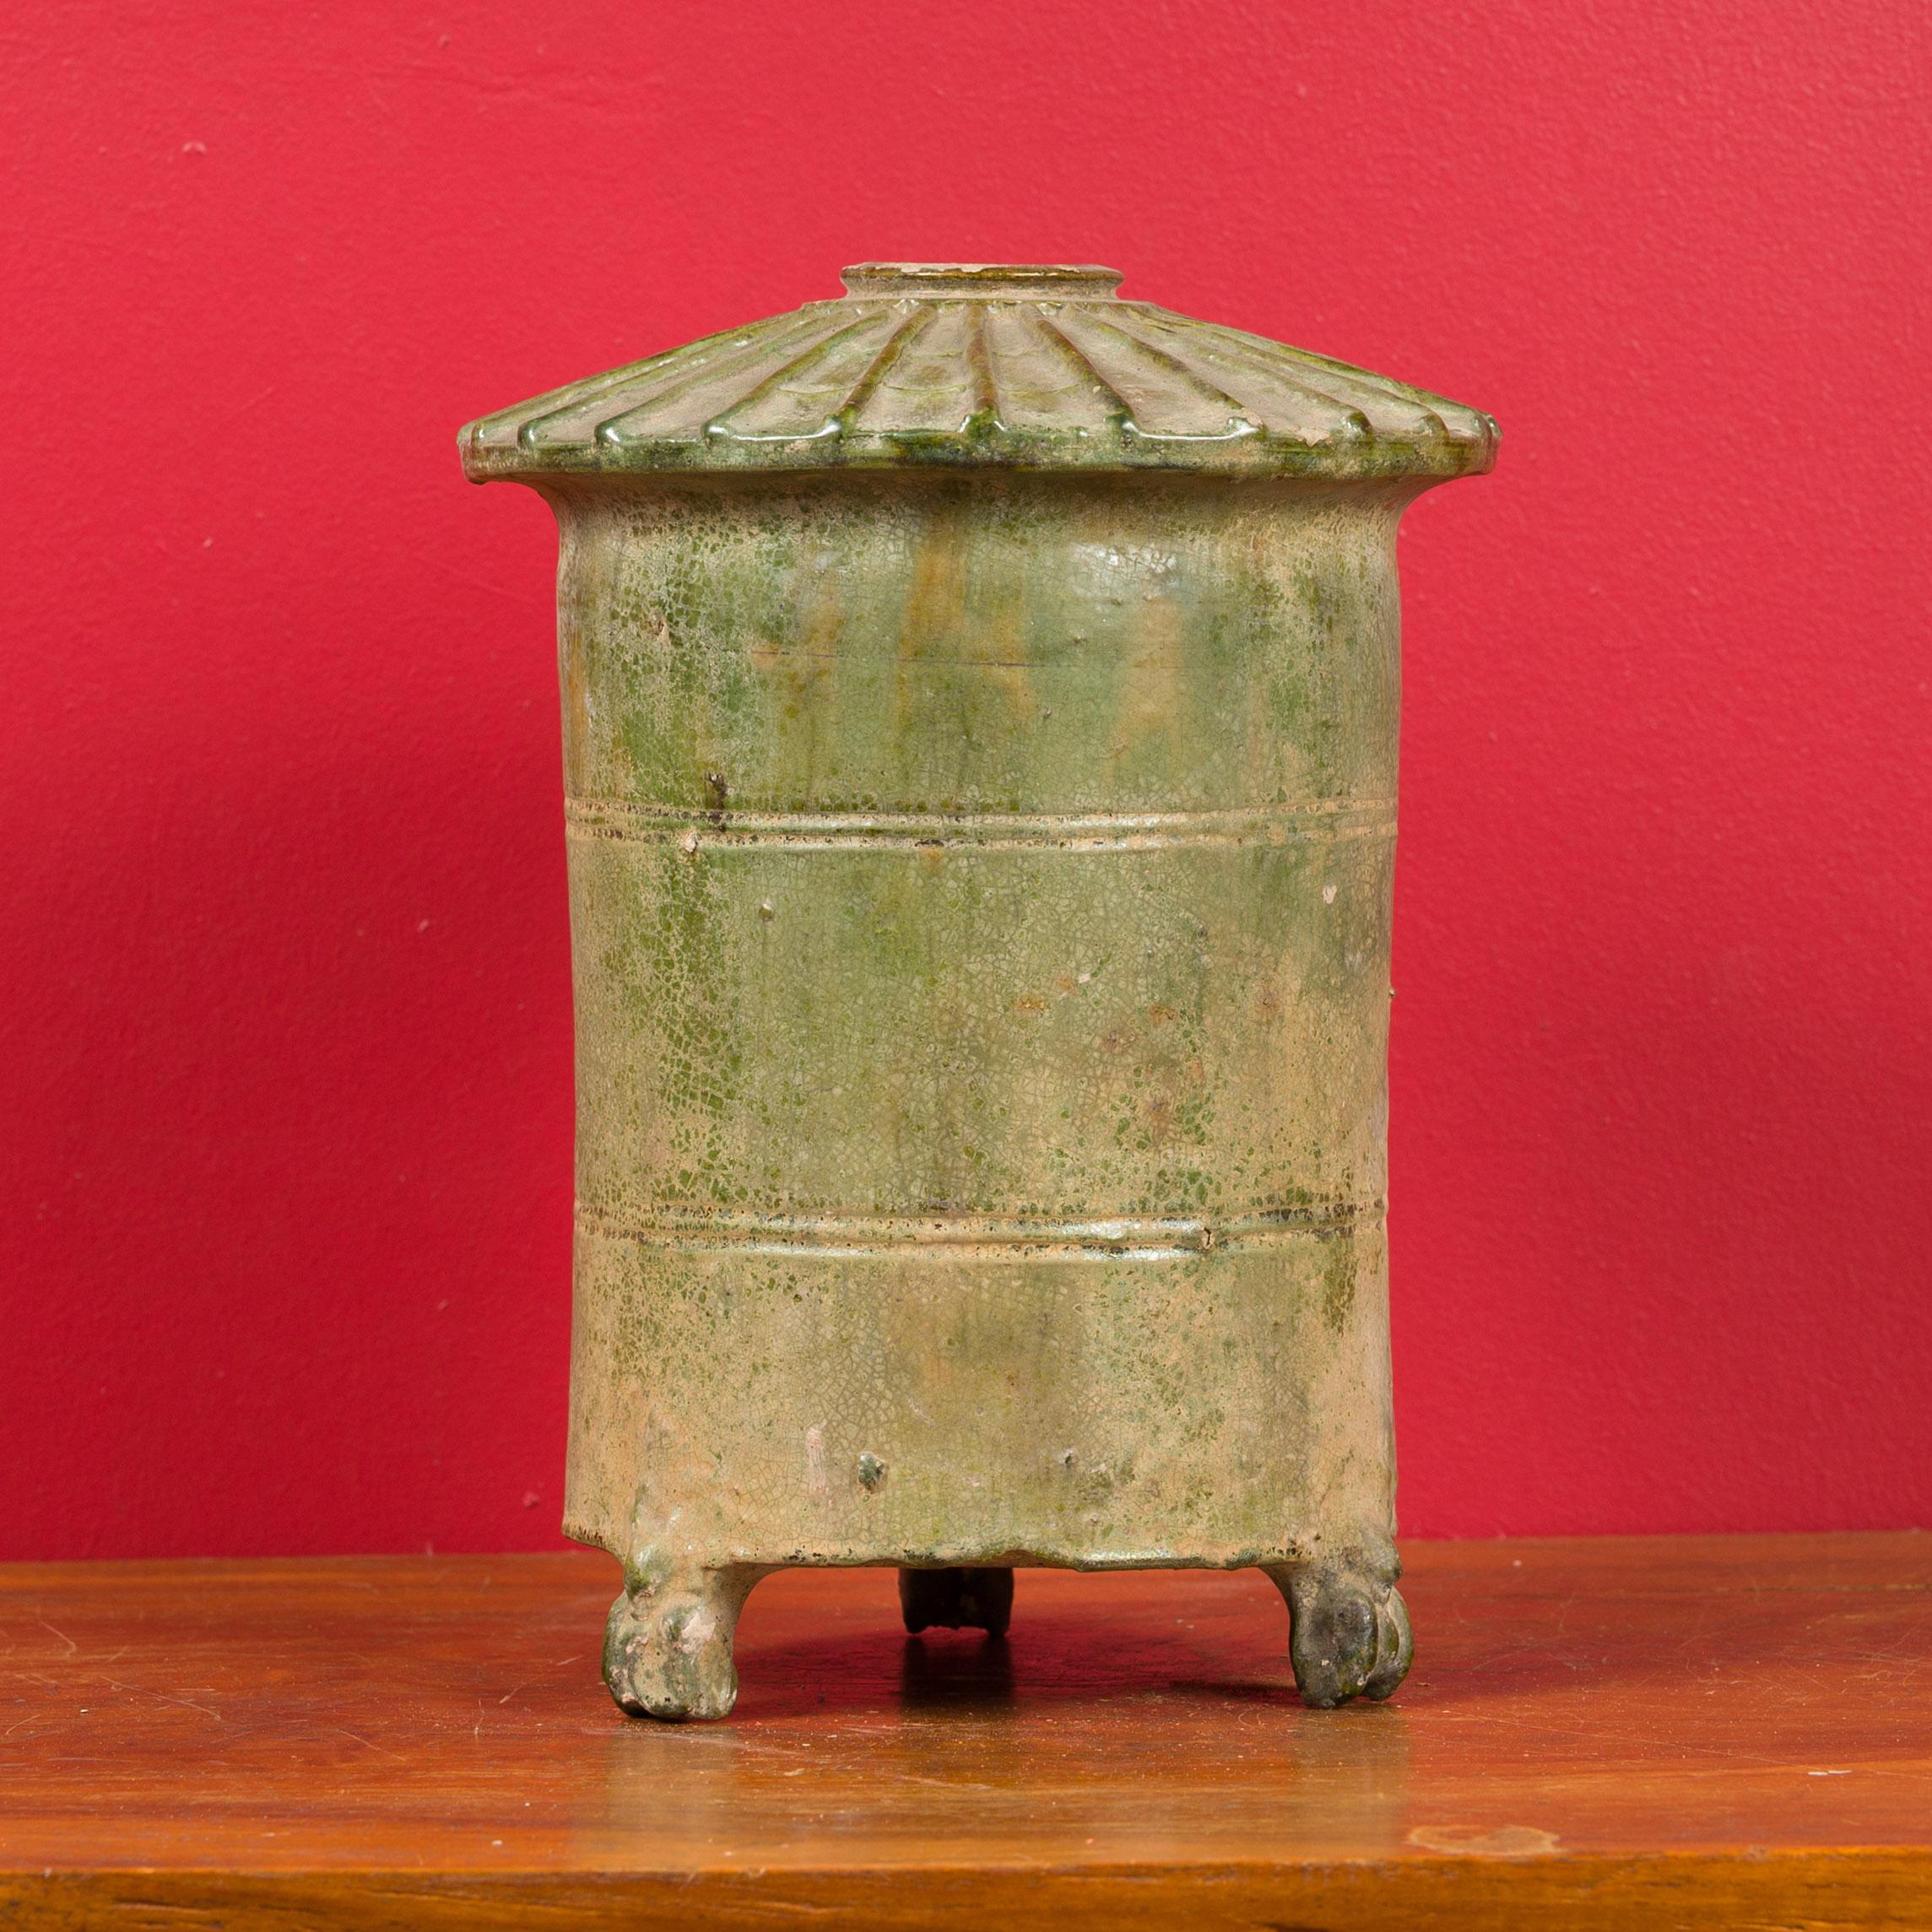 A 17th century Chinese Ming Dynasty granary hand made from terracotta with a verde-gris patina. This miniature of a traditional Chinese granary features a conical top and rests on three small legs. Such items were often placed in graves in order to